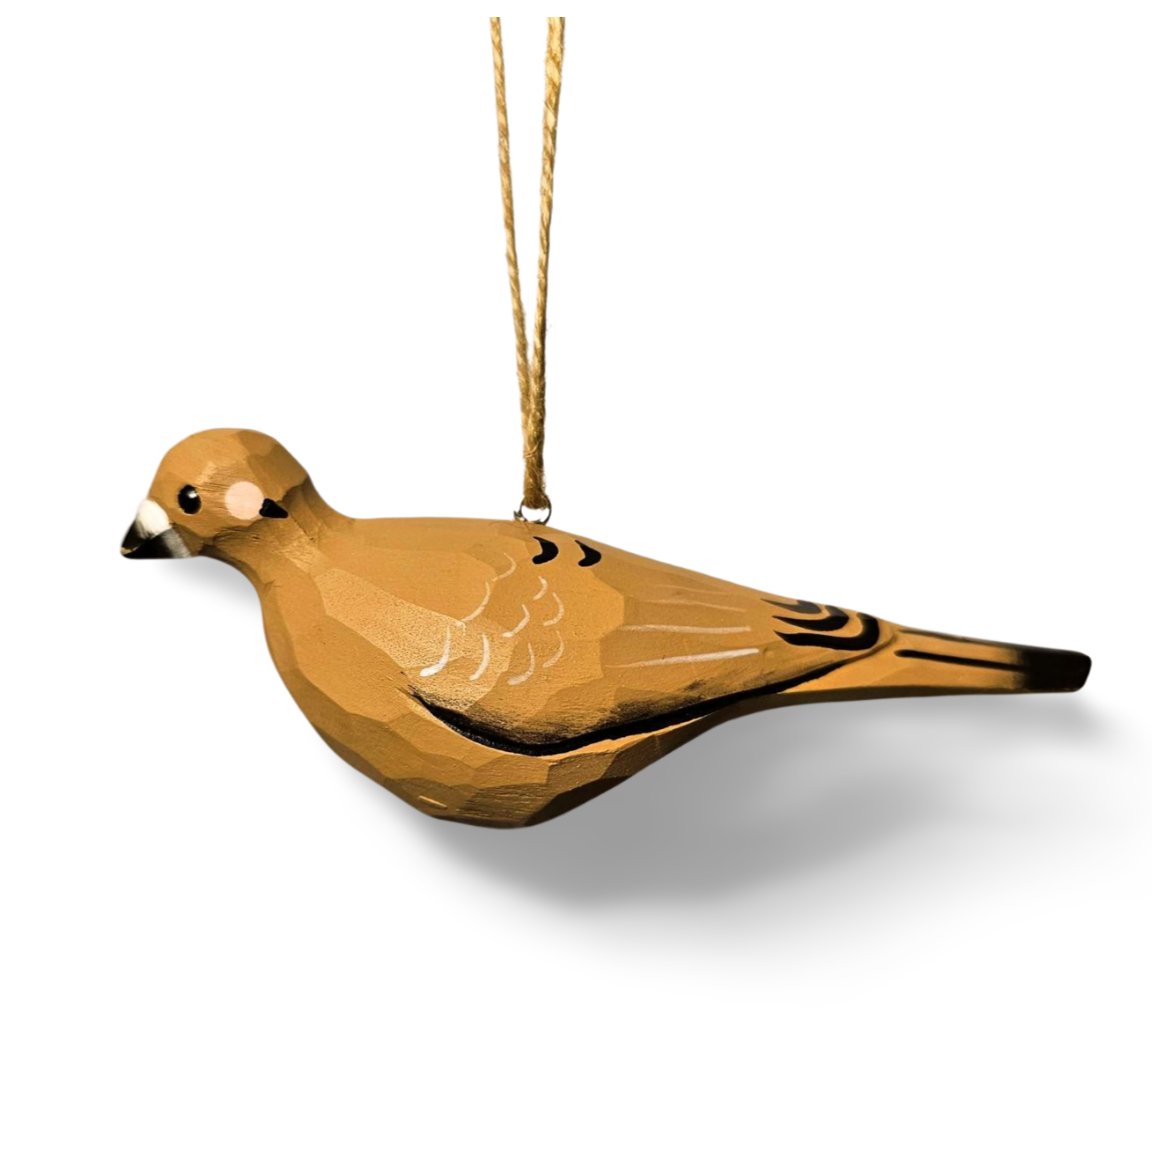 Exquisite Hand-Painted Pigeon Ornaments - A Perfect Addition to Your Home Decor - Wooden Islands